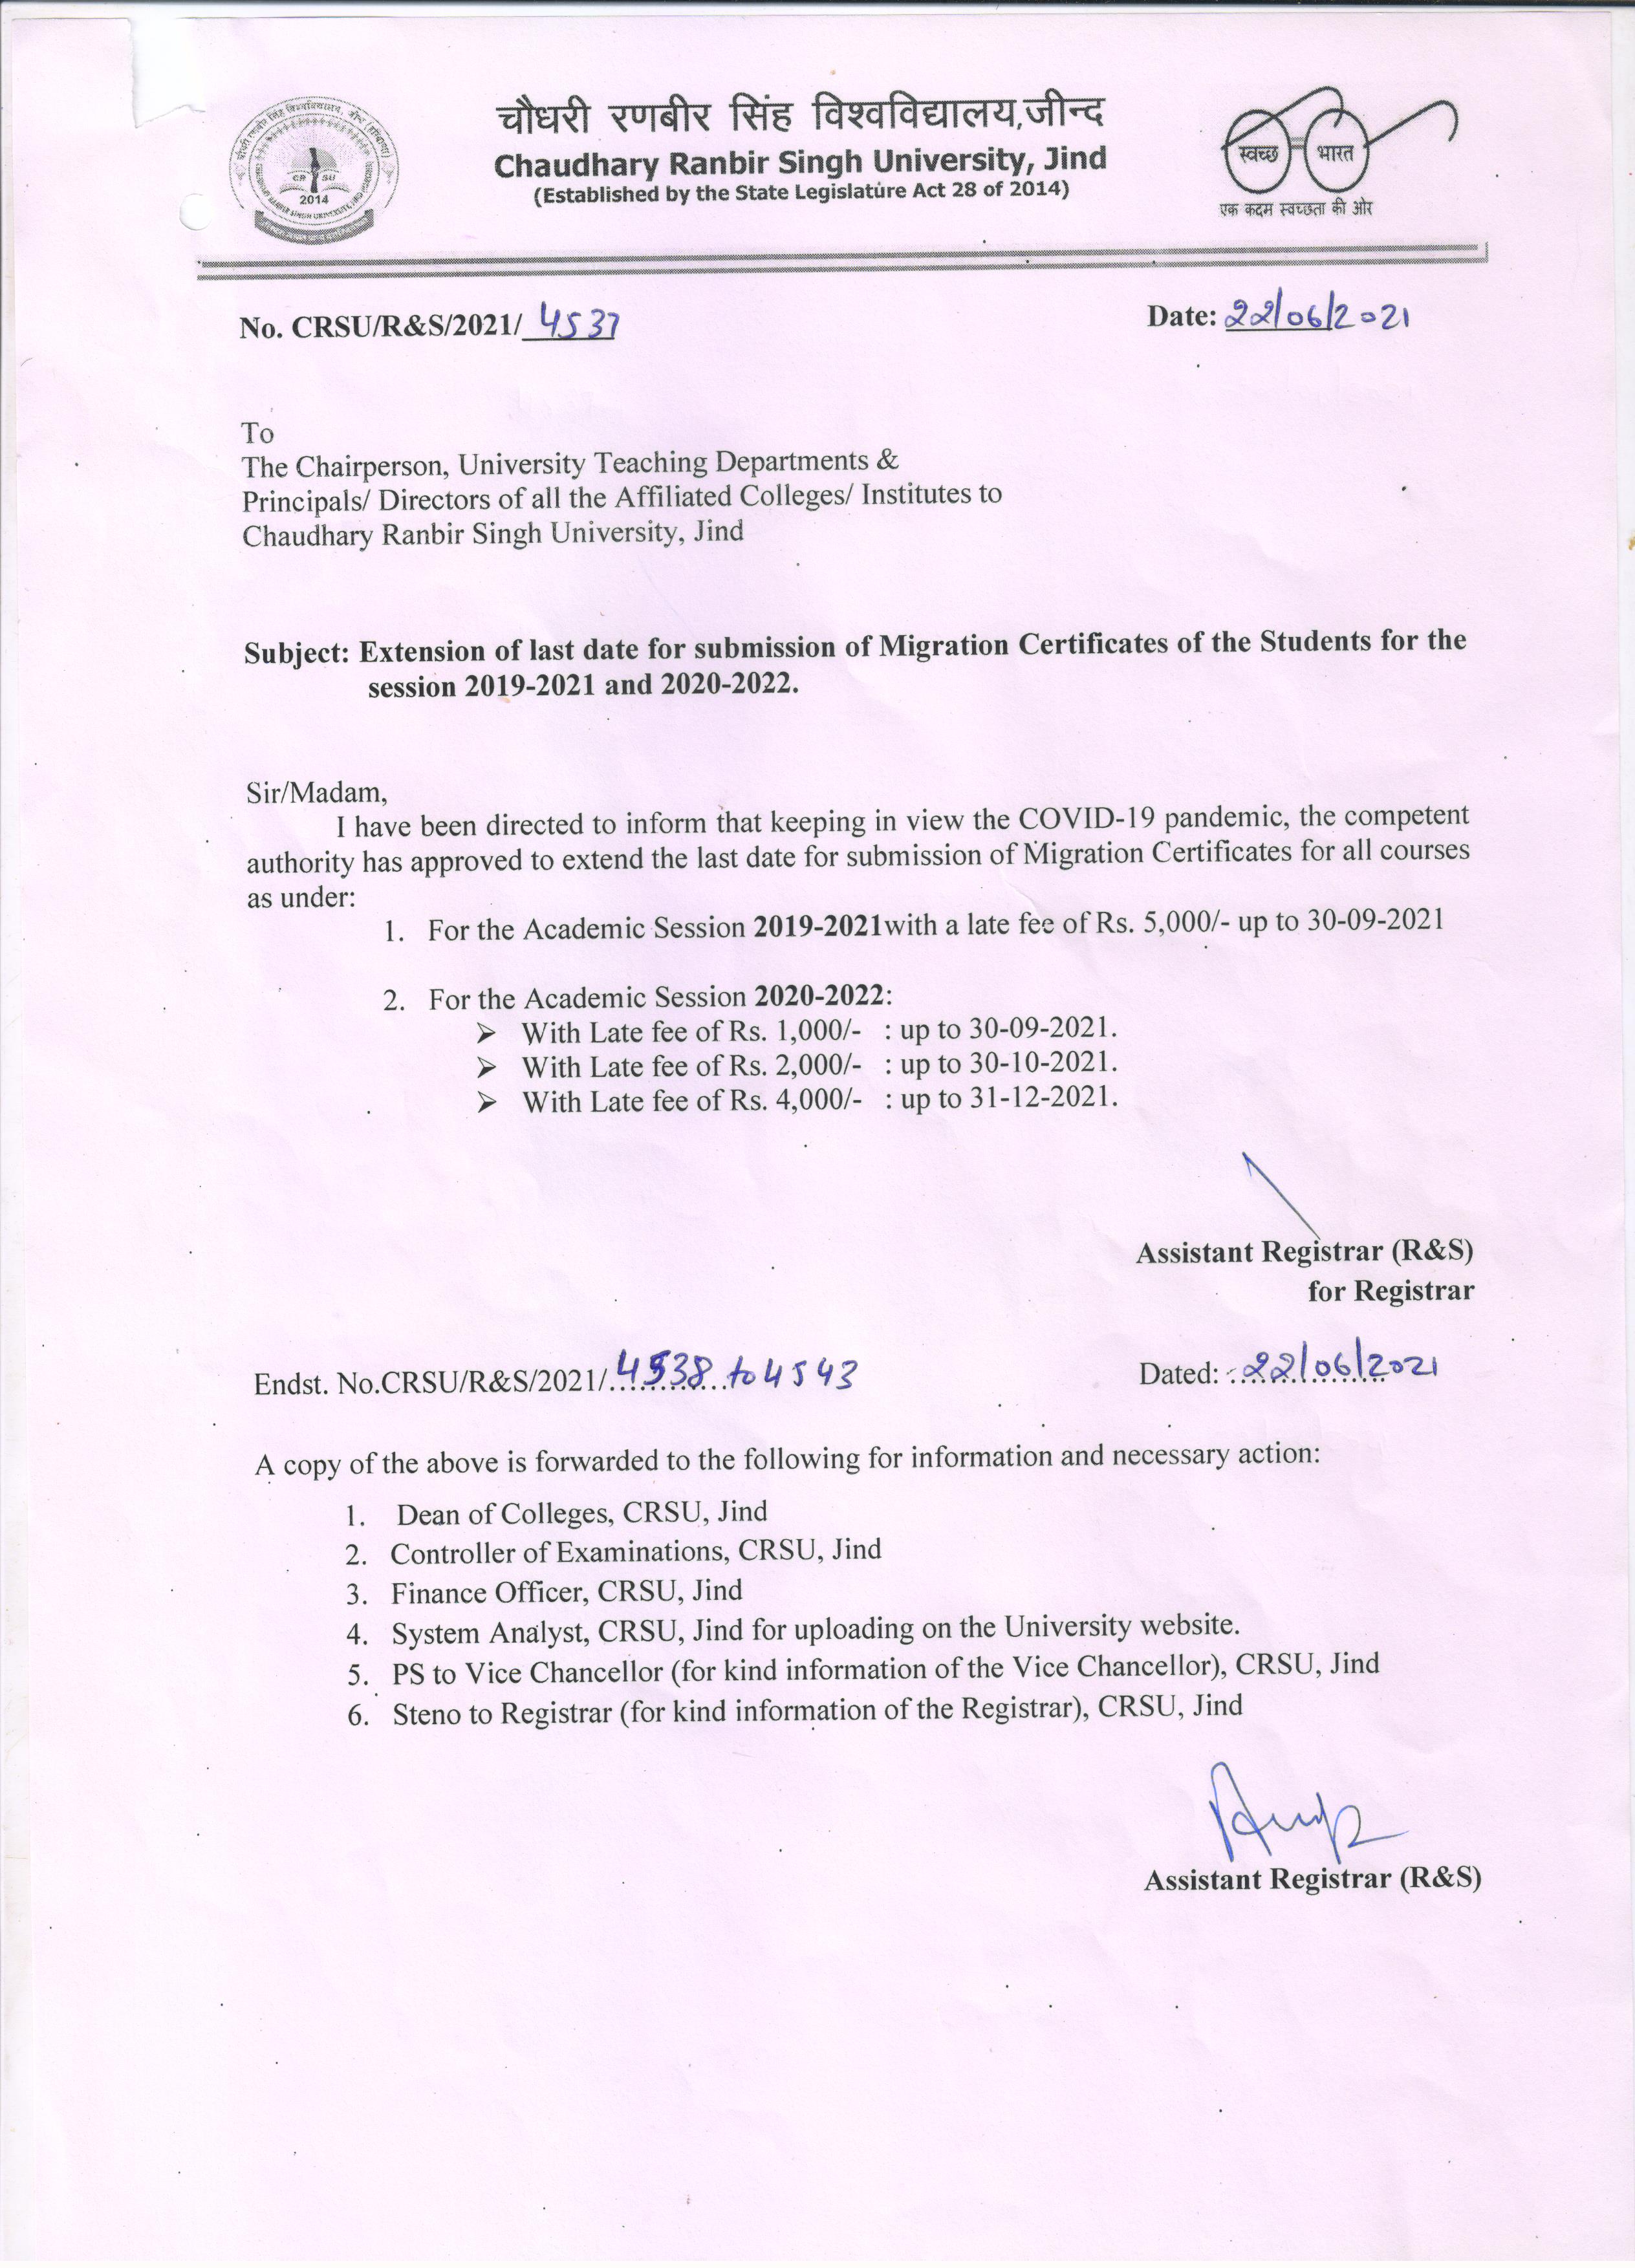 Migration Cert Submission last Date Extension  session 2019-20 and 2020-21